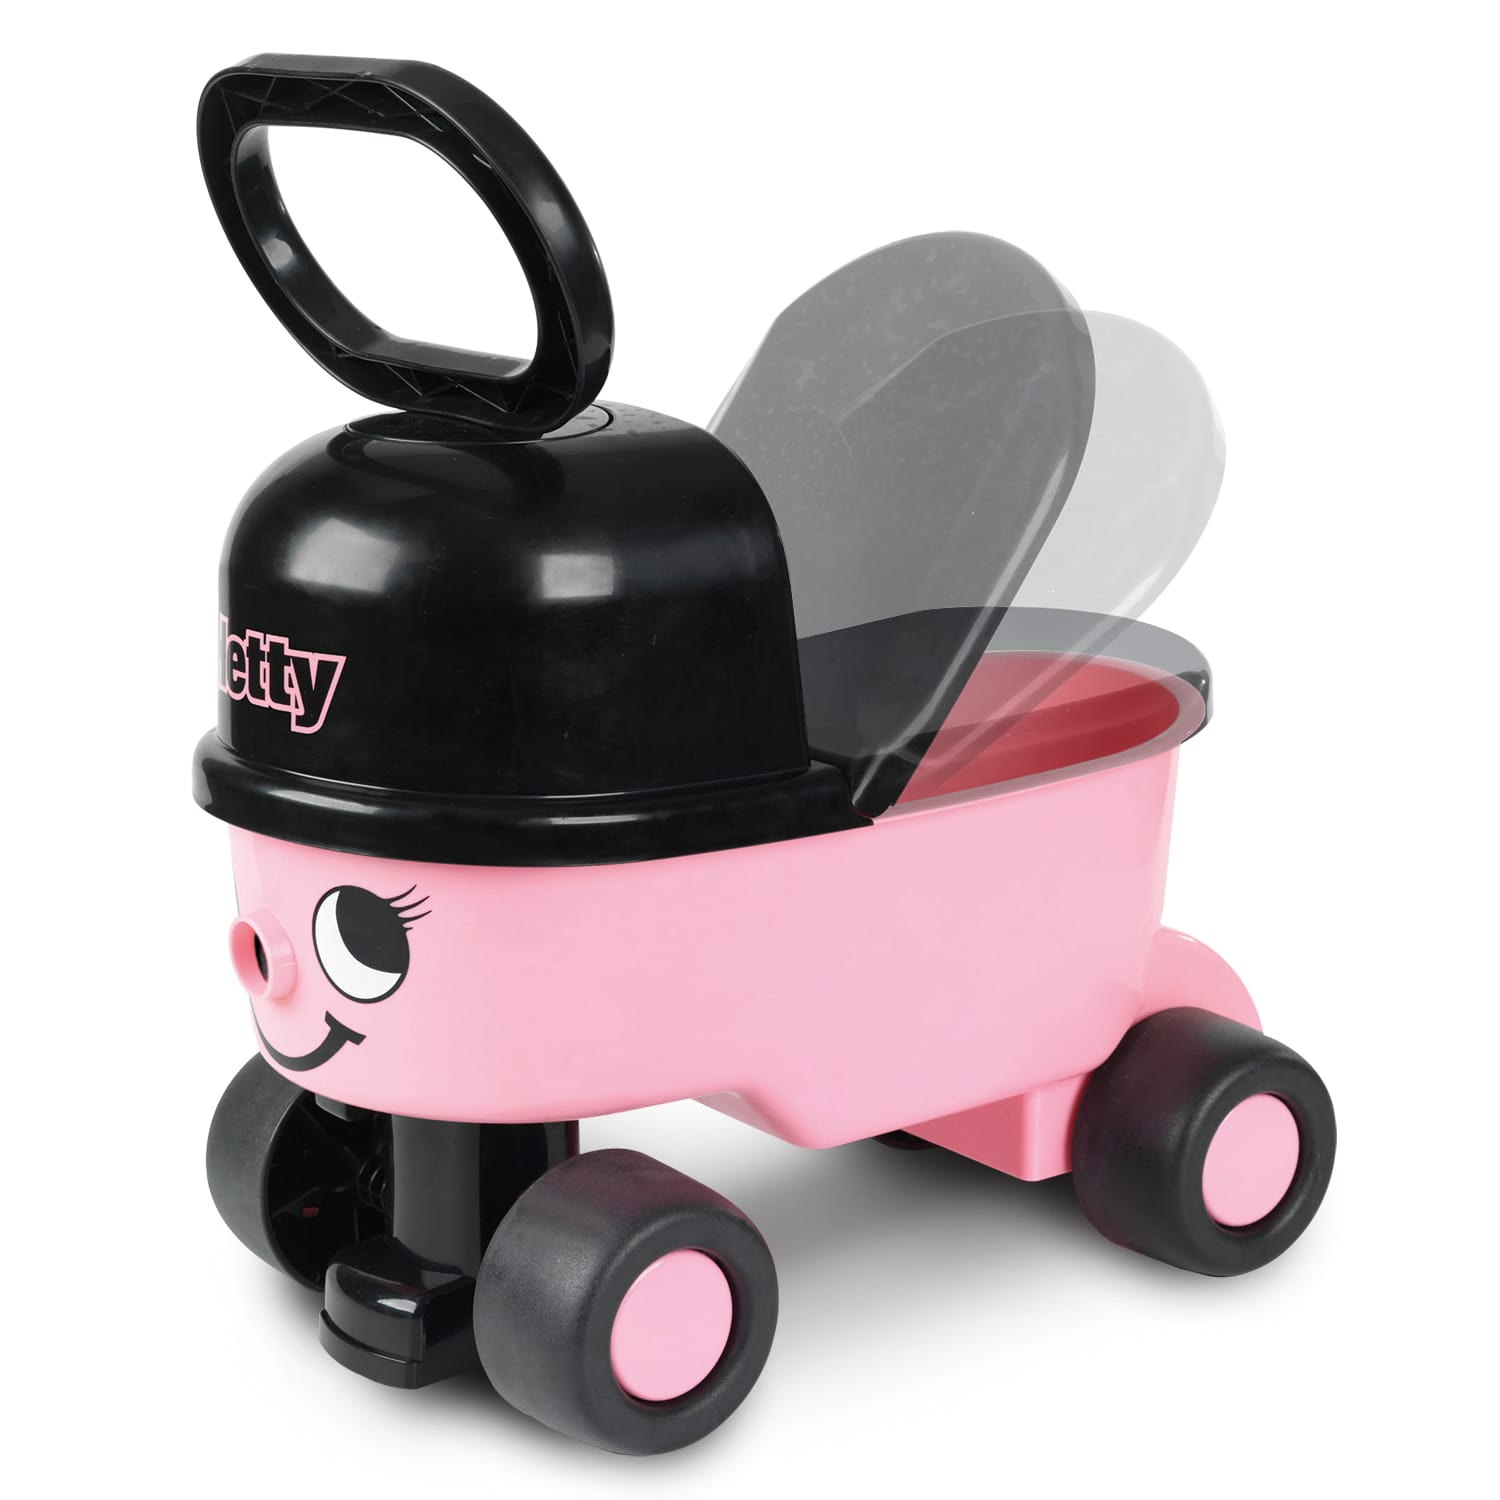 hetty the hoover toy